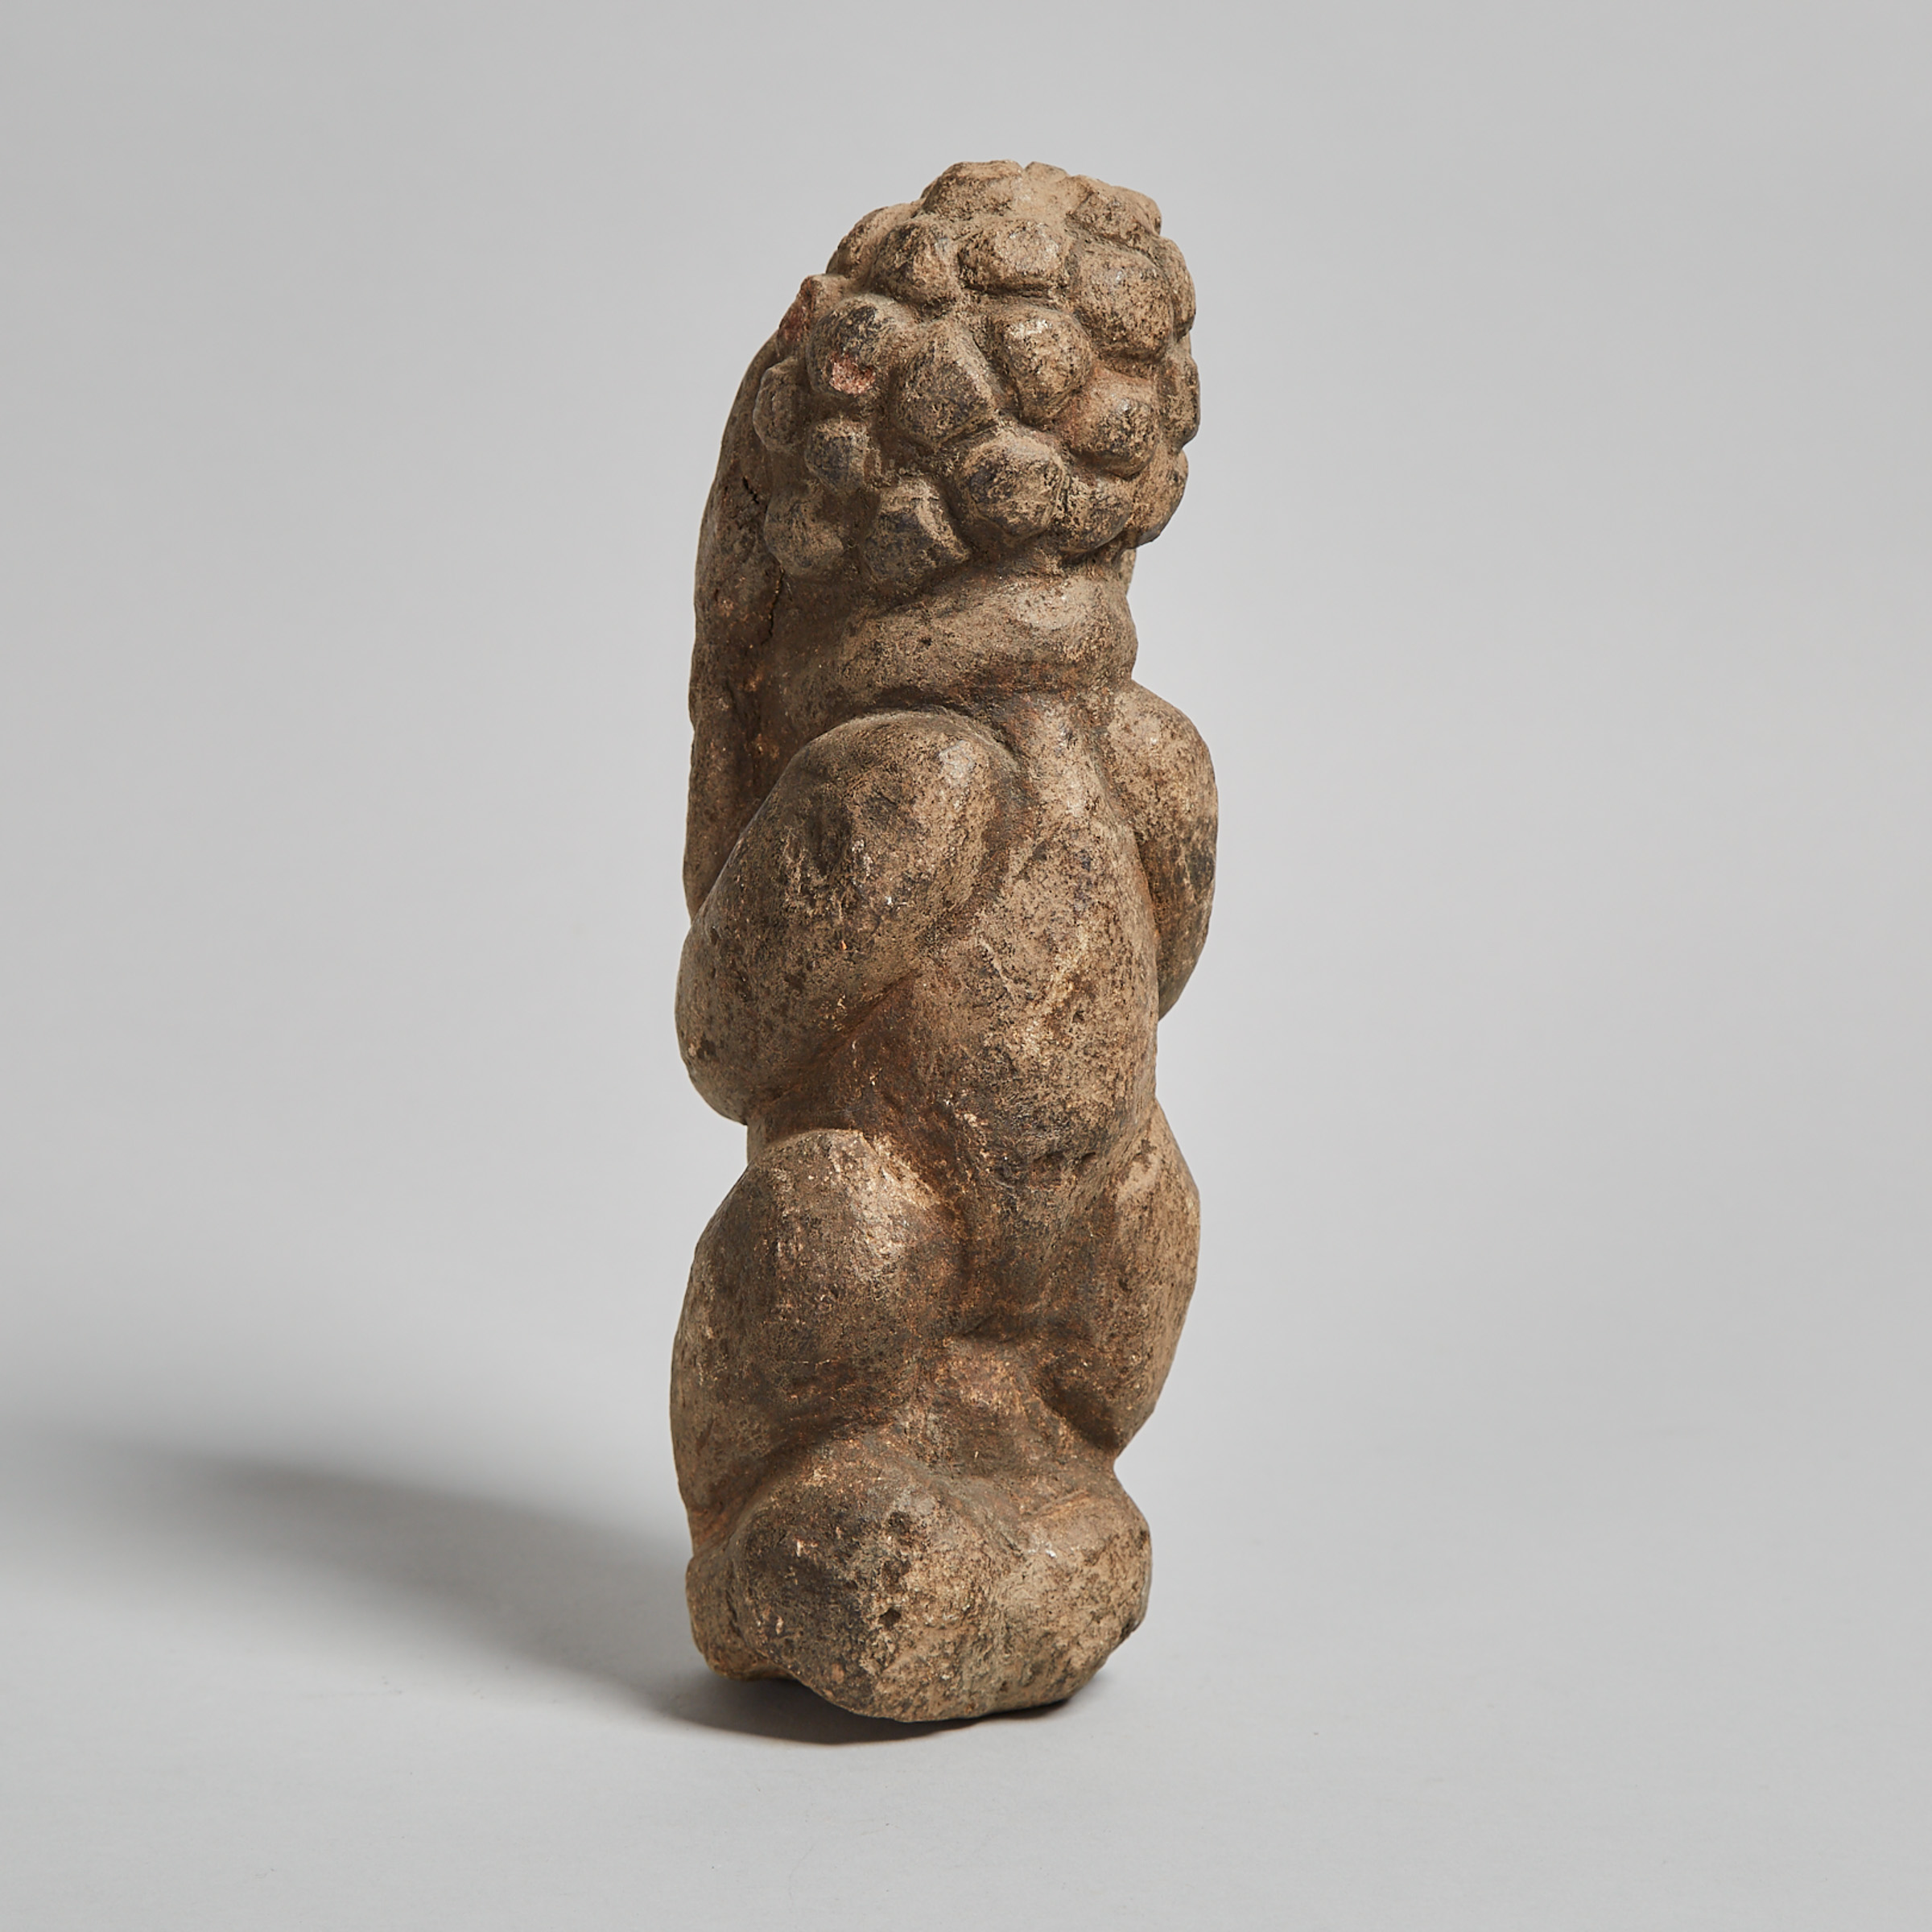 Carved Granite Kneeling Figure, Cameroon, West Africa, possibly 19th/ early 20th century